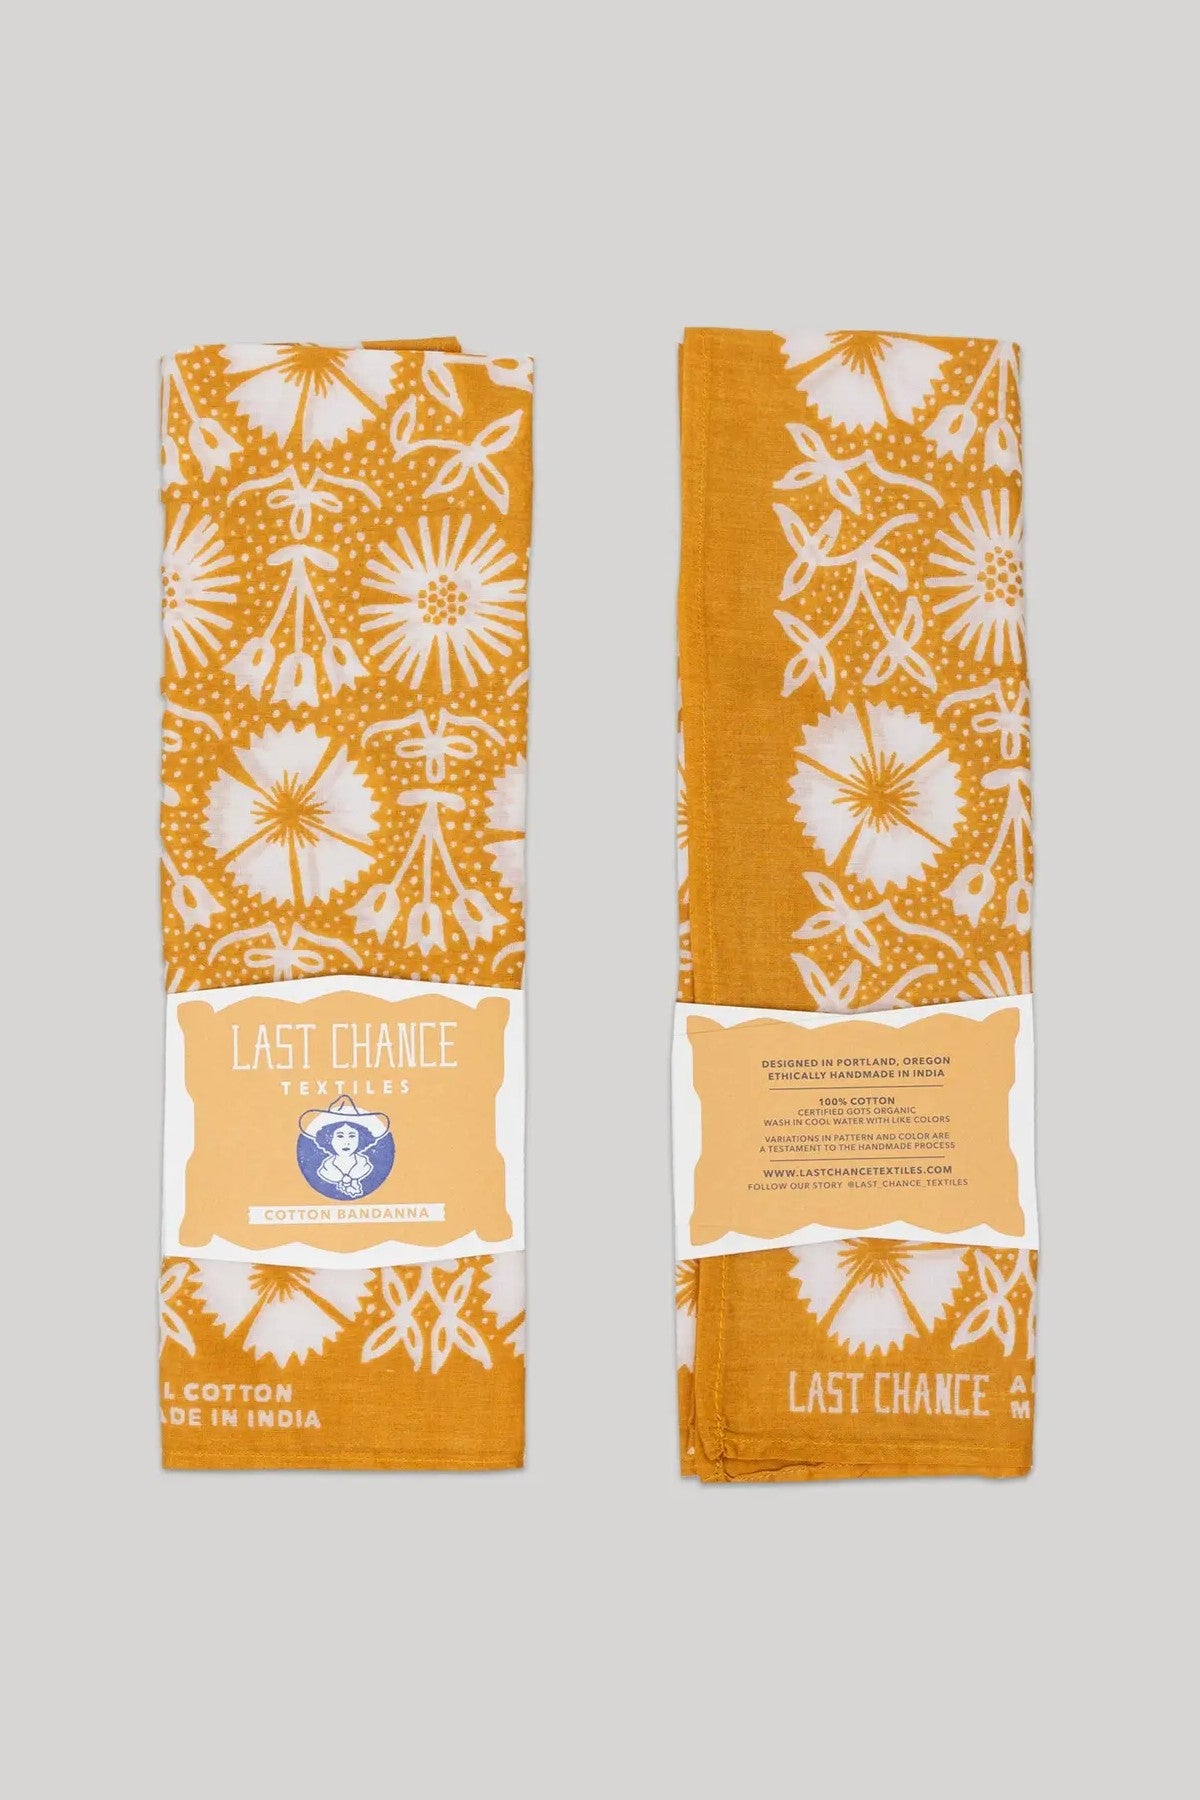 LAST CHANCE TEXTILES _ HAND DRAWN HAND BLOCK PRINTED NATURAL DYE GOTS ORGANIC COTTON BANDANA _ MADE IN INDIA _ FLORAL PRINT _ BUTTERNUT GOLD